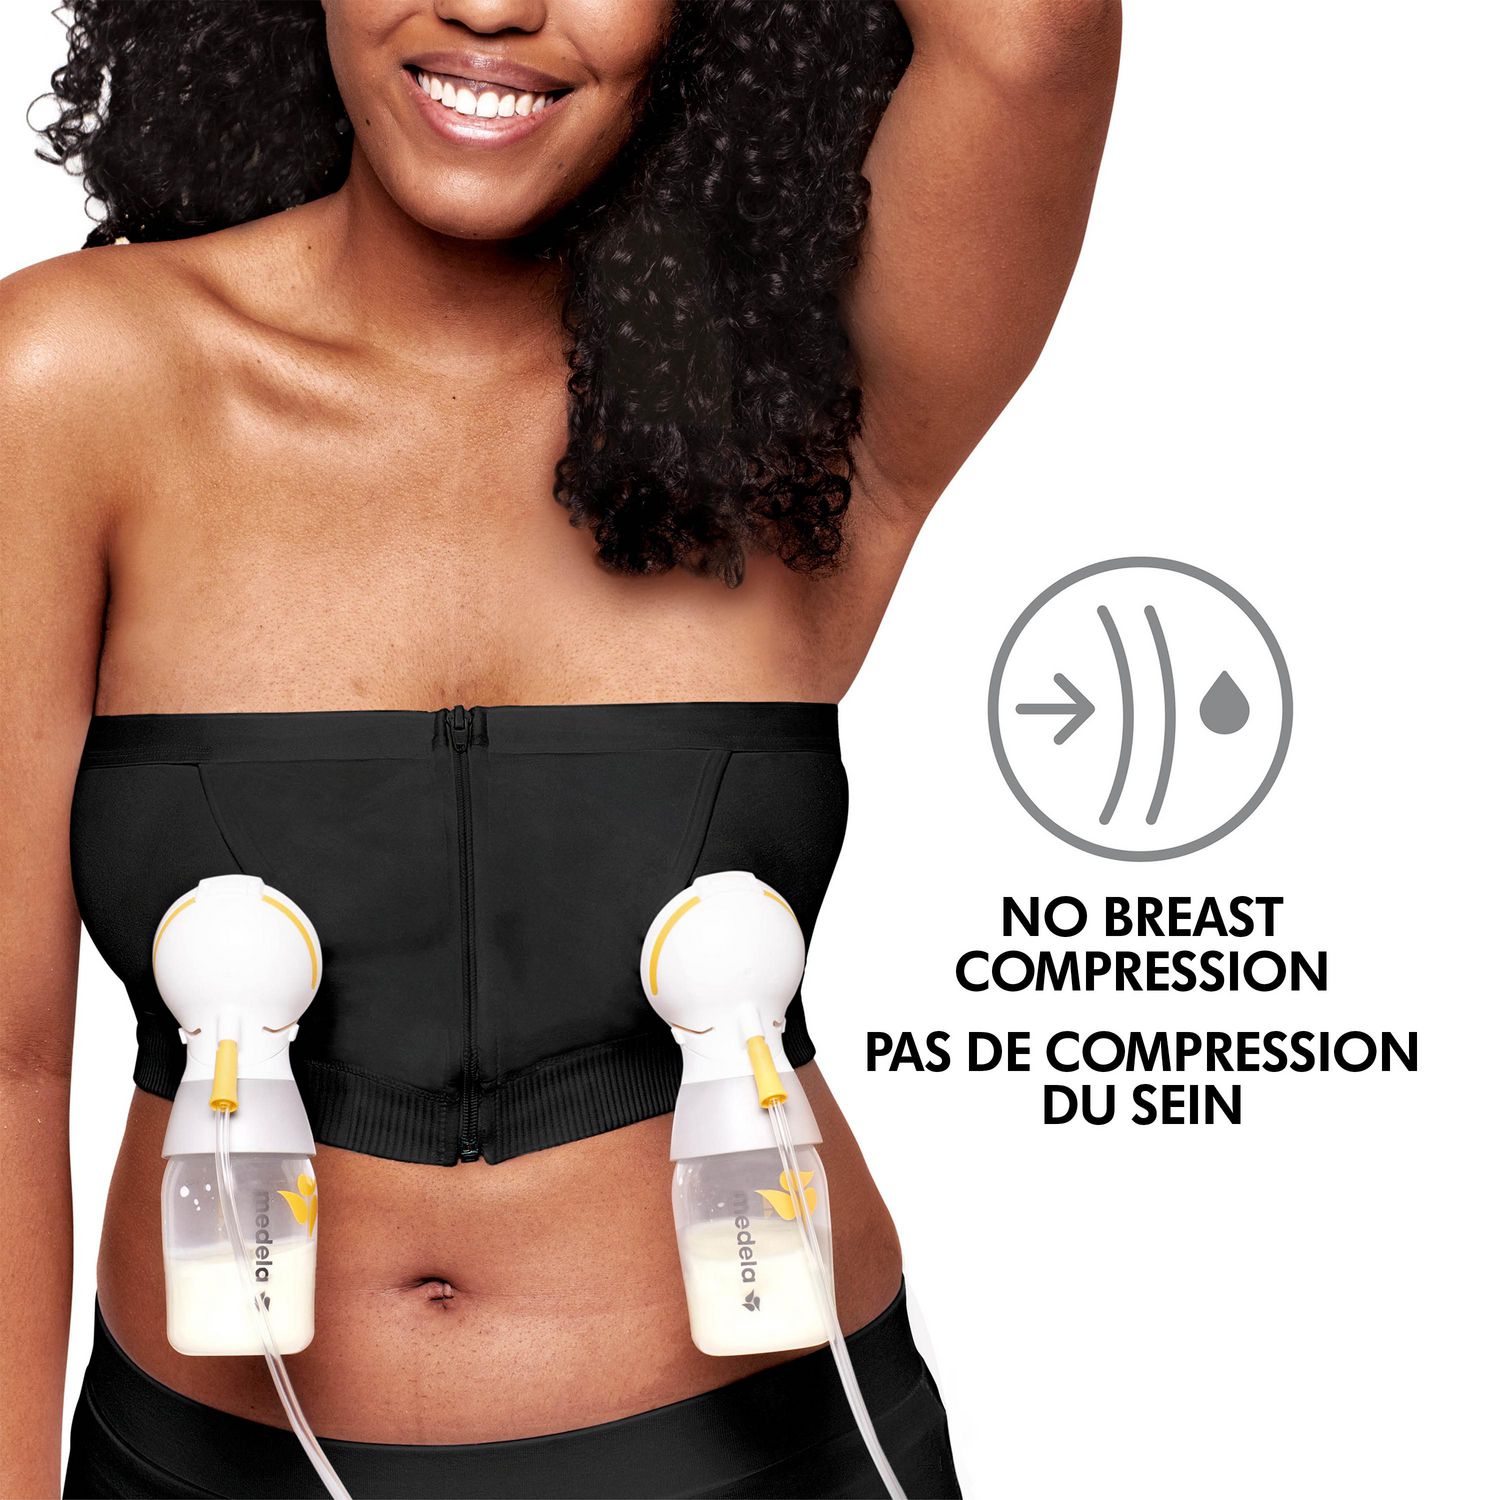 medela pumping bra easy expression halter and nipple sheilds Small